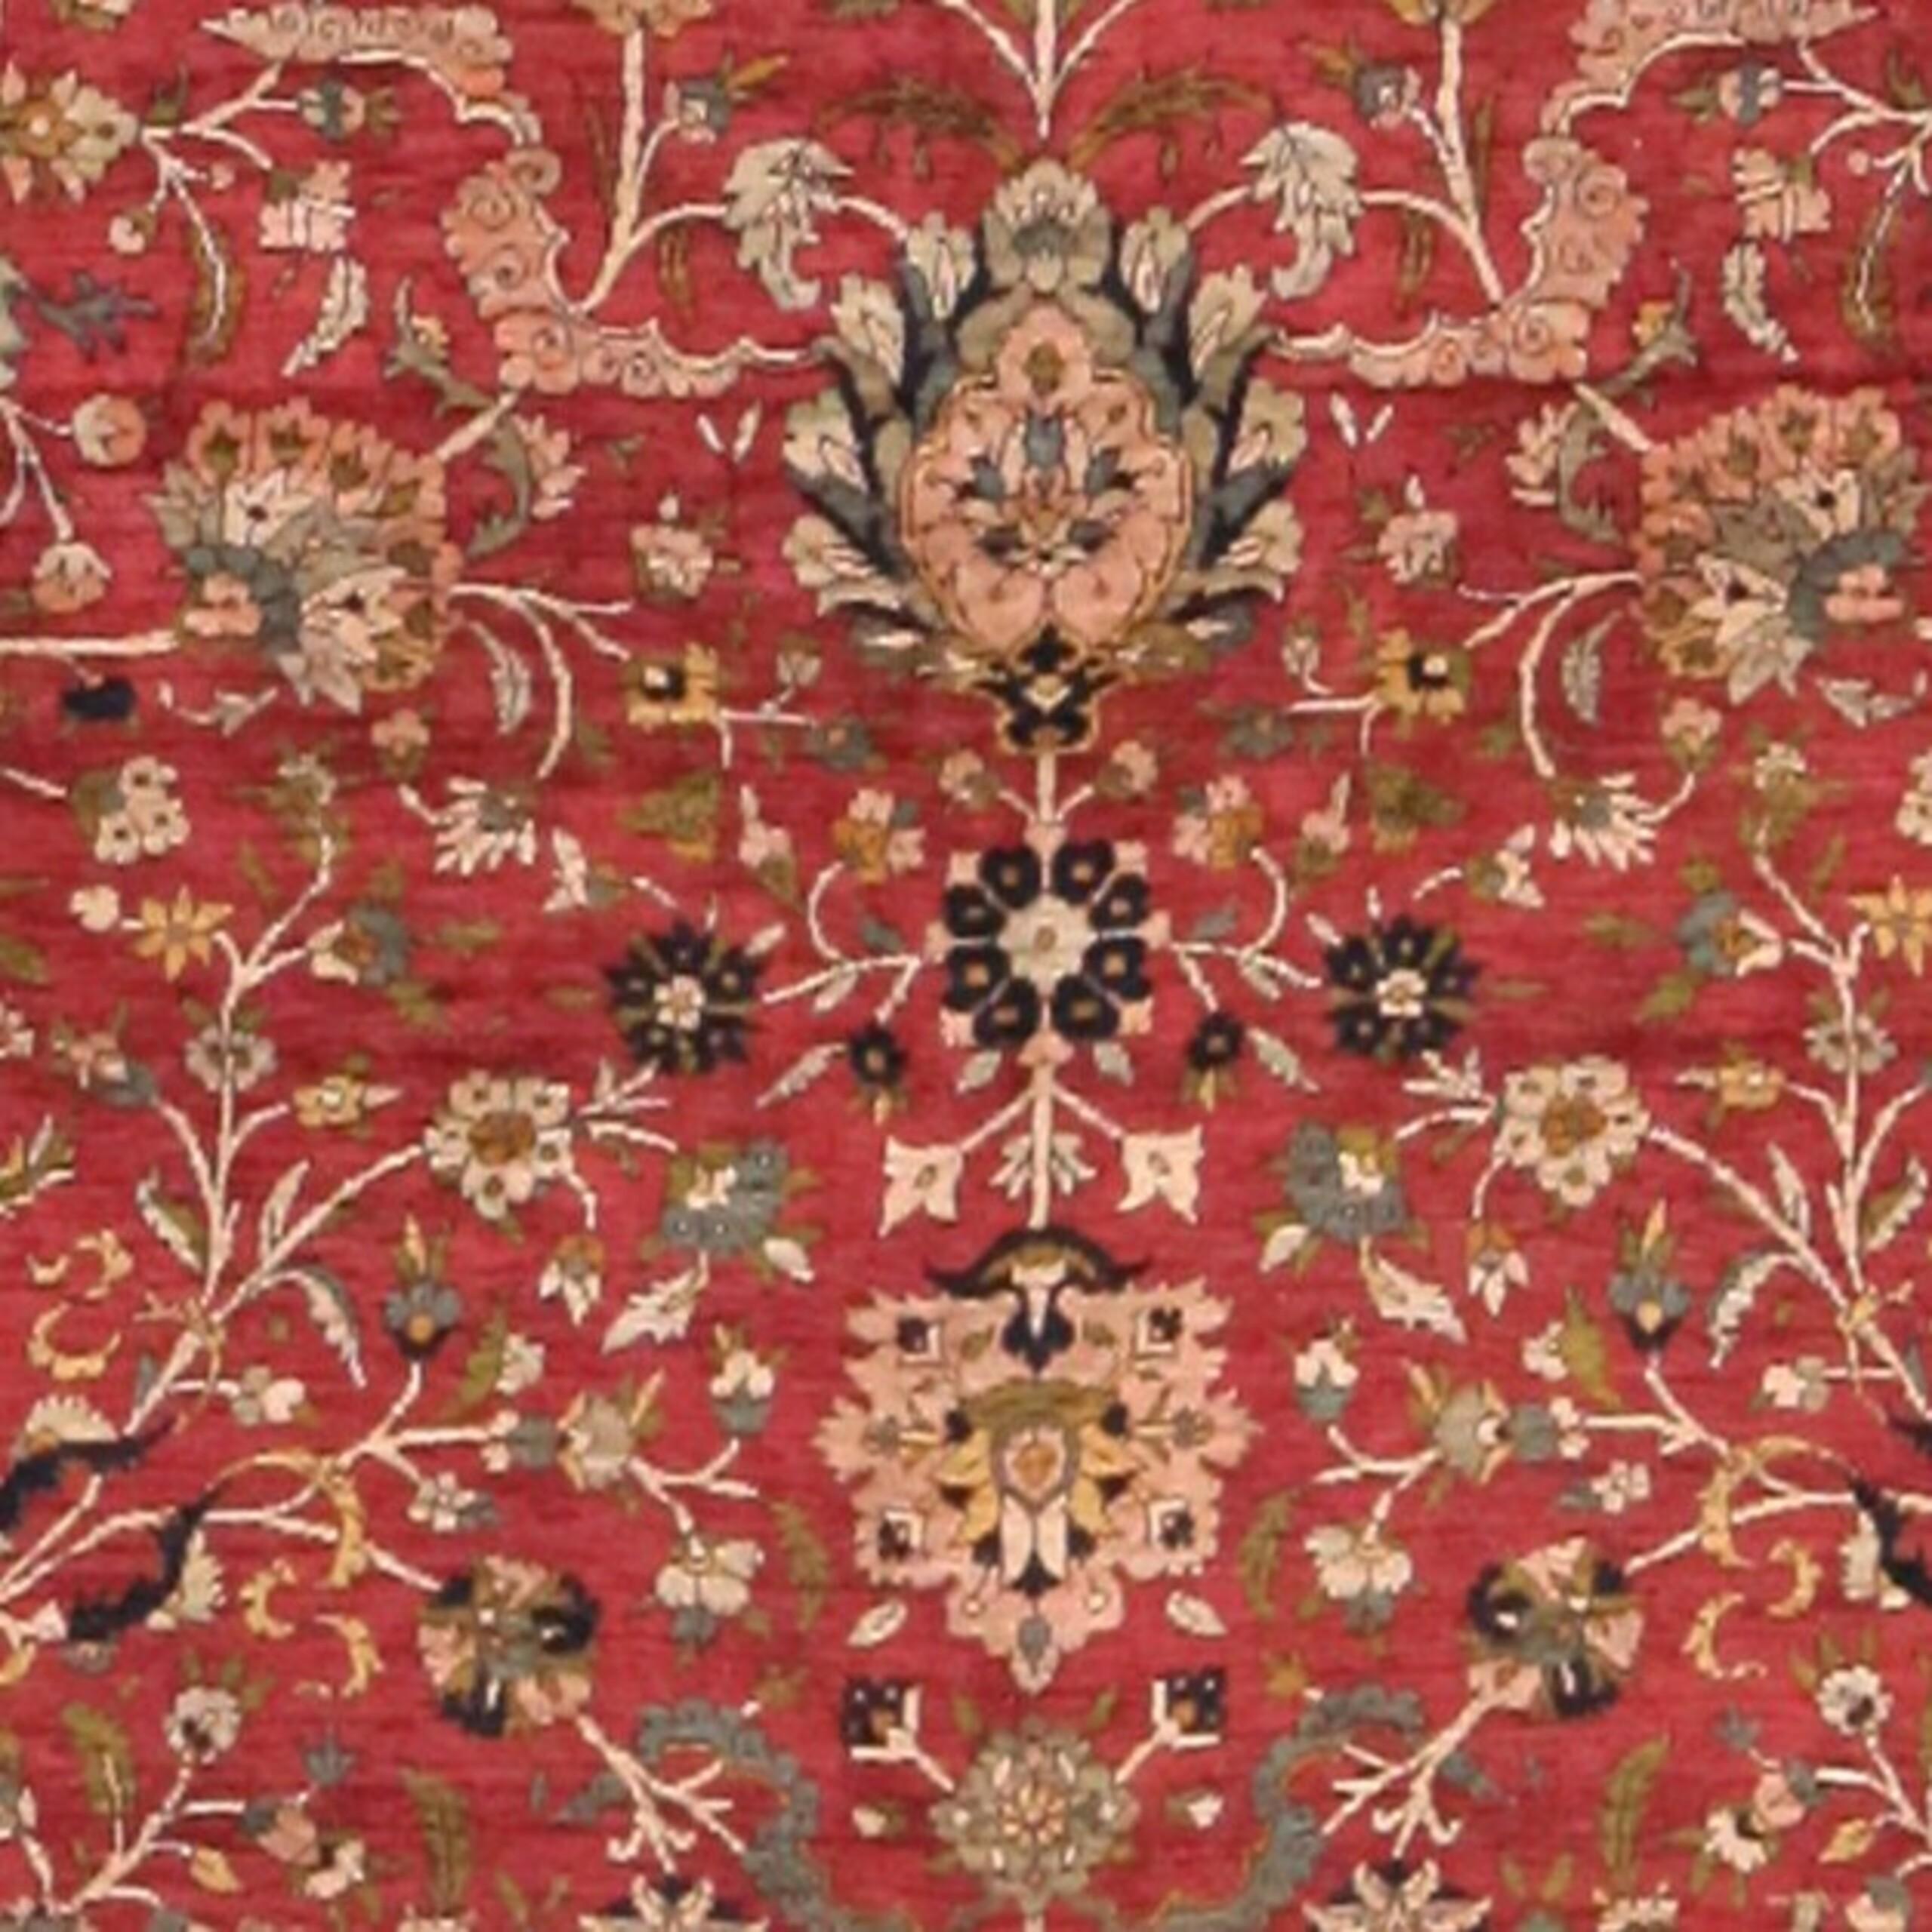 Extremely Fine And Intricate Silk Antique Indian Mughal Area Rug, Country Of Origin: India, Circa Date: 18th Century. Size: 4 ft 1 in x 6 ft 2 in (1.24 m x 1.88 m)